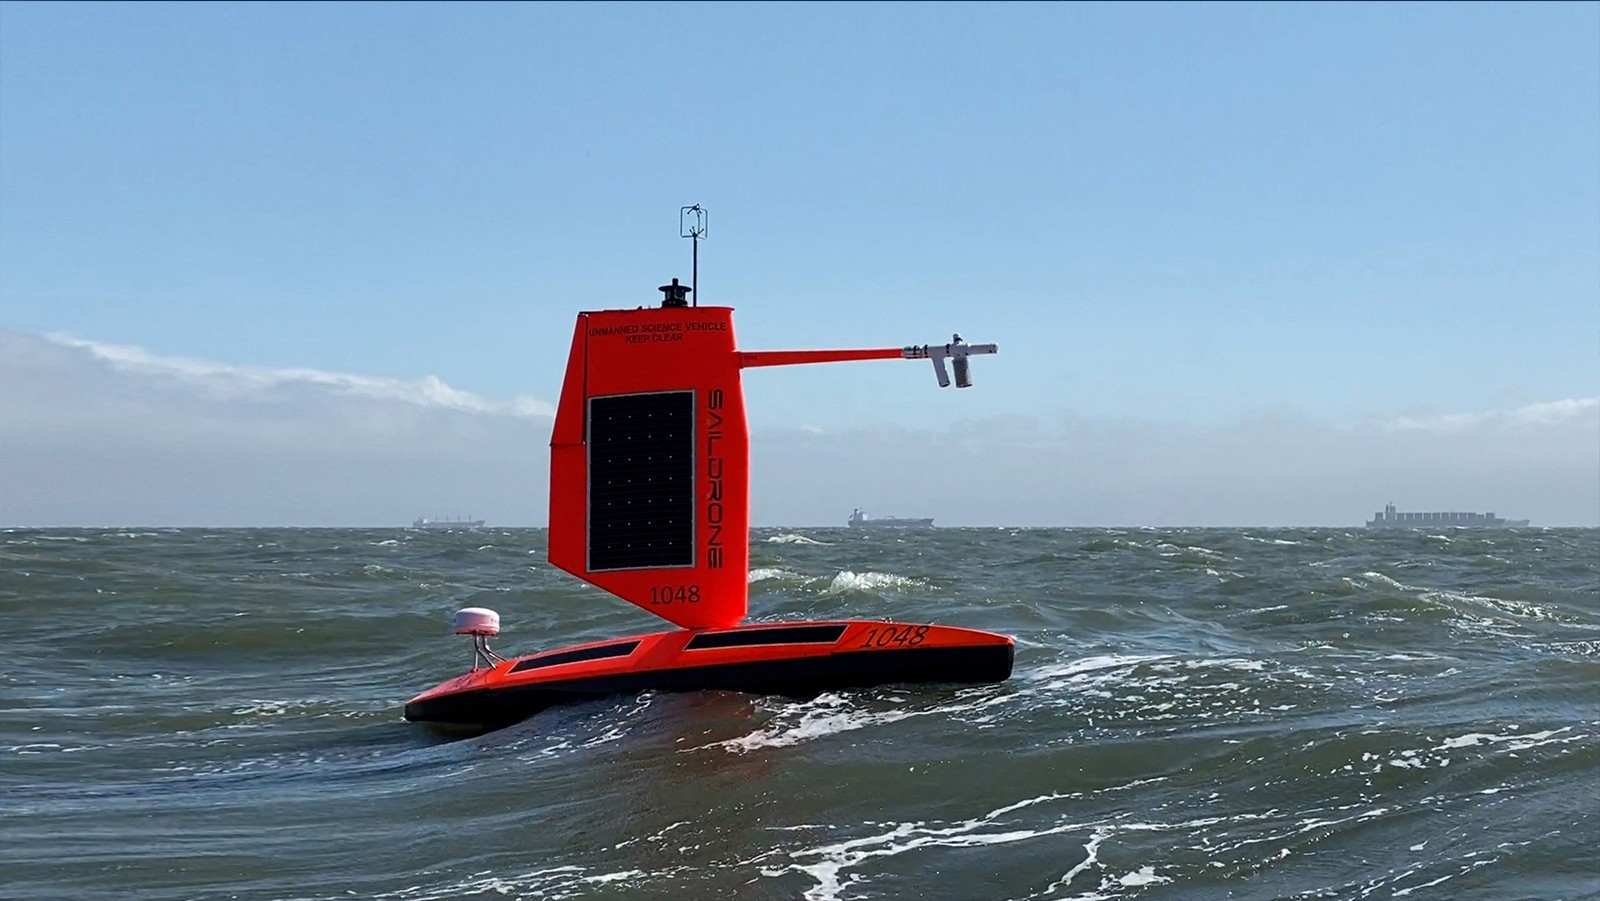 A large orange/red saildrone floats in the ocean